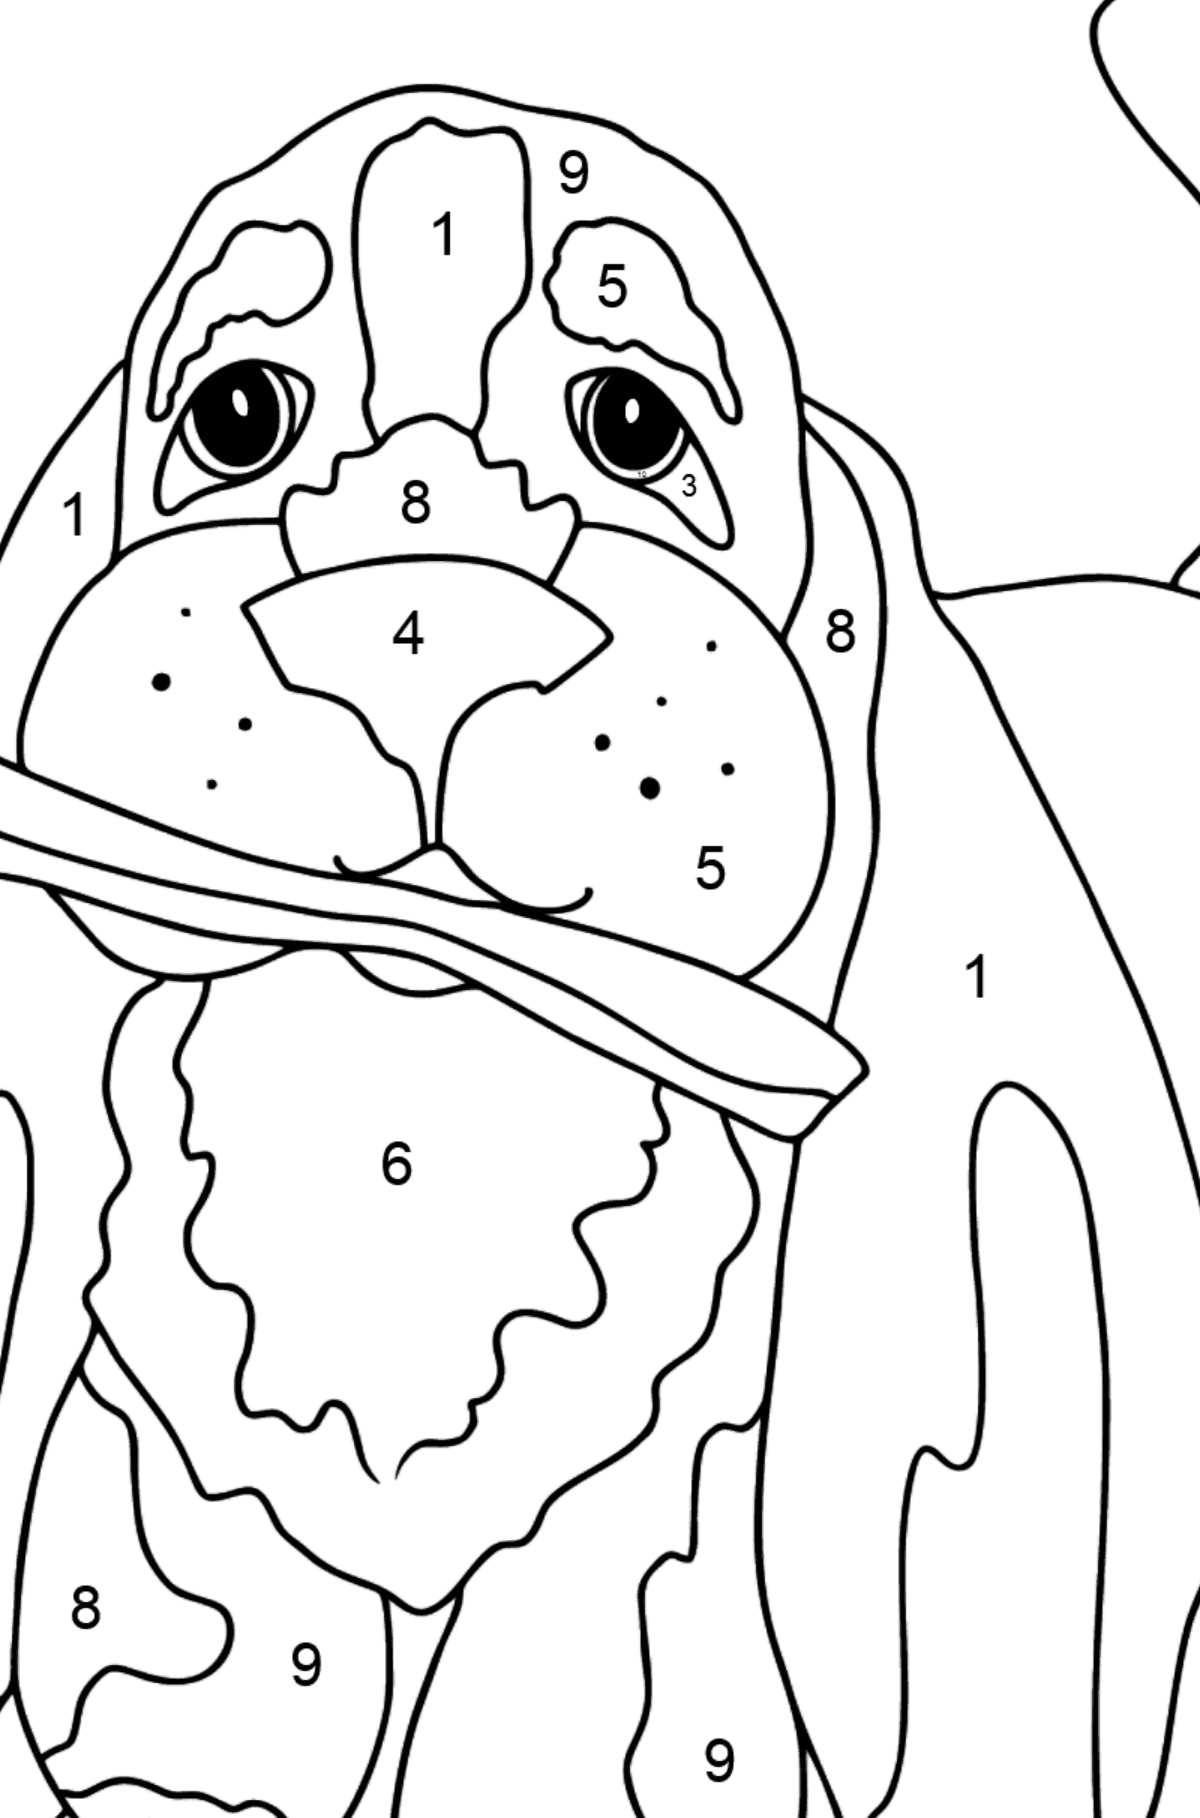 Coloring Page - A Dog is Waiting for Its Owner with a Stick - Coloring by Numbers for Kids